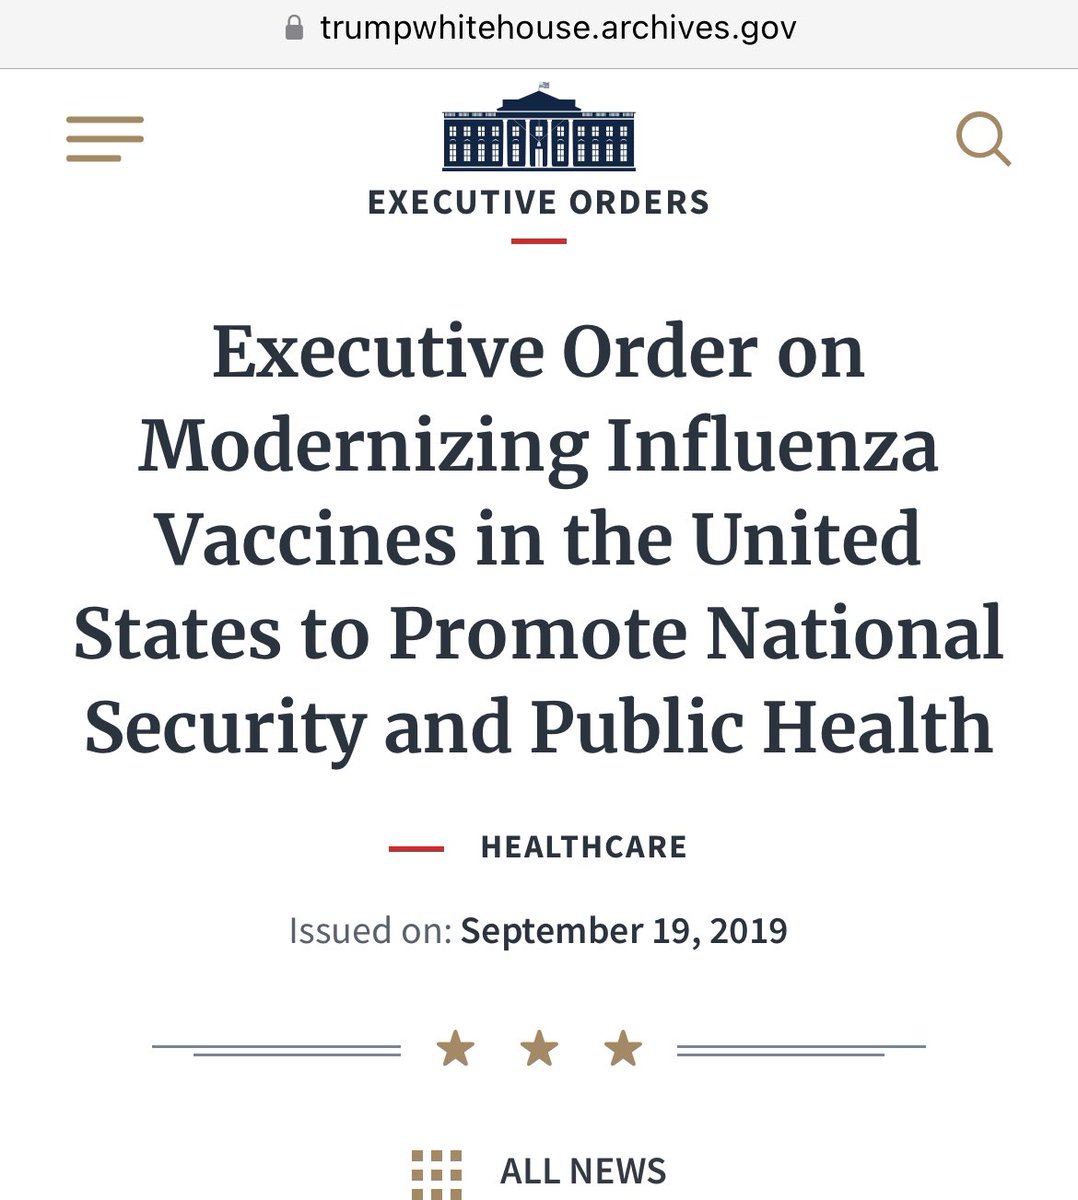 Gates tells Trump to do a universal flu vaccine in 2018

Trump passes it thru Executive Order in 2019

Wait until MAGA figures out who their master is really serving…